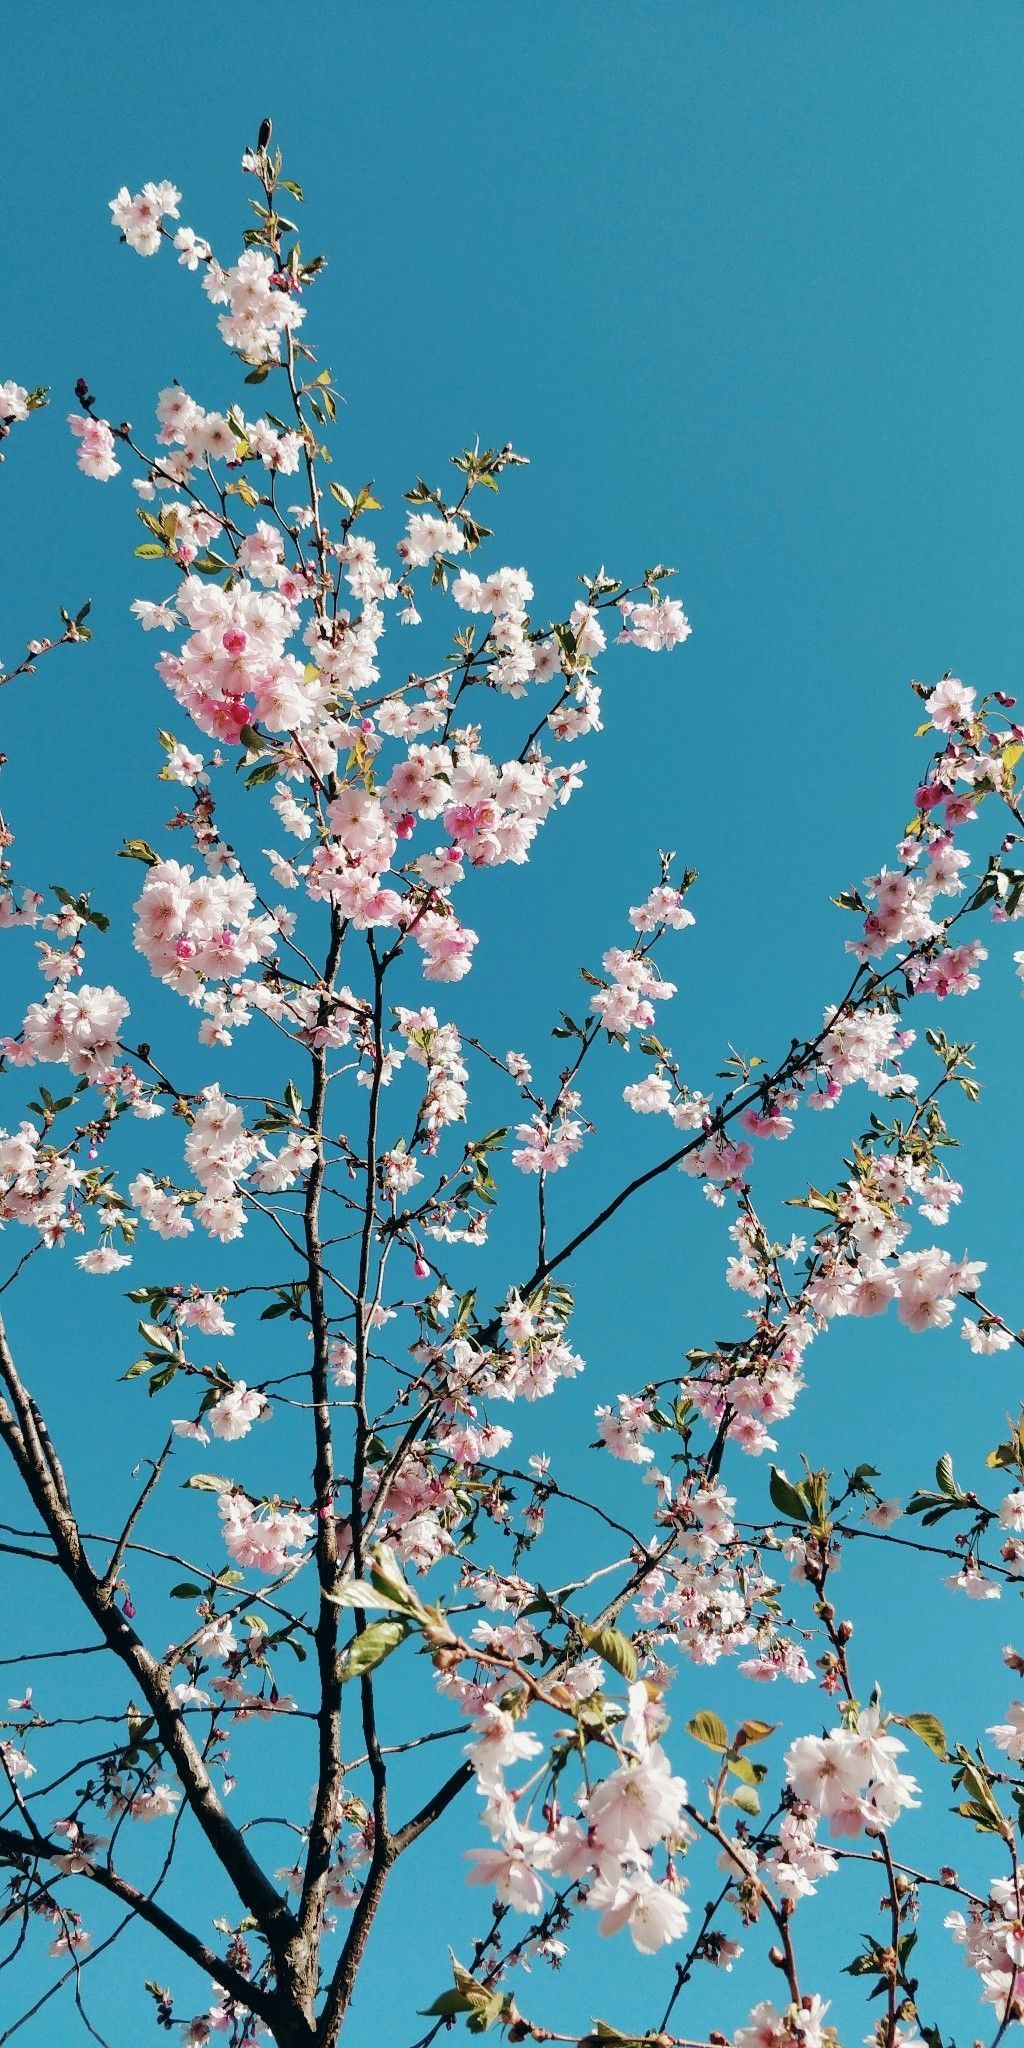 A tree with pink flowers in front of a blue sky - Cherry blossom